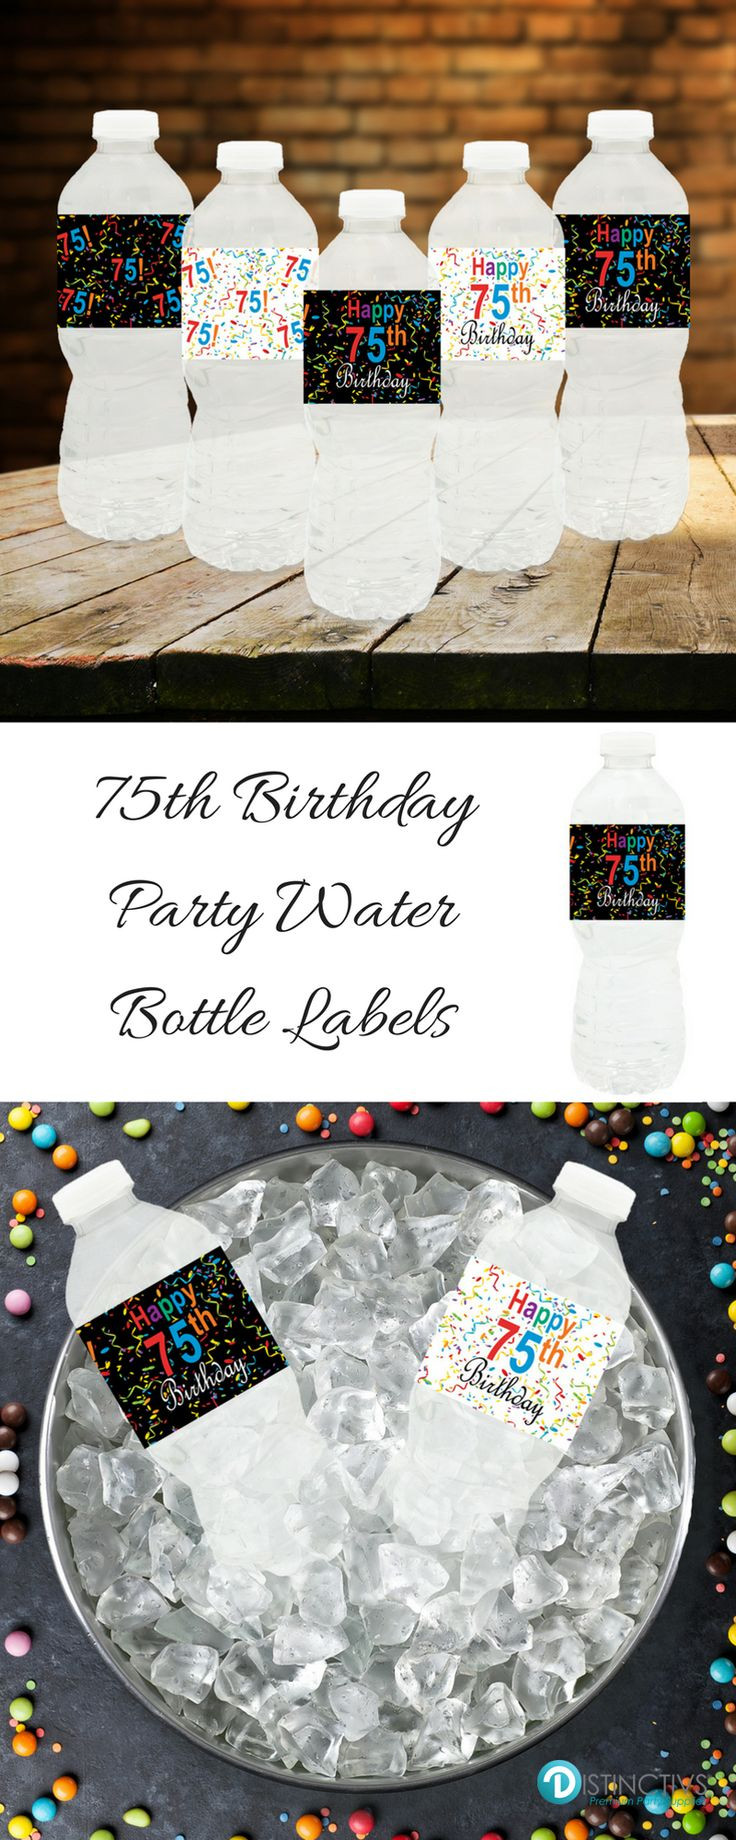 75th Birthday Party Decorations
 55 best 75th Birthday Party Ideas images on Pinterest